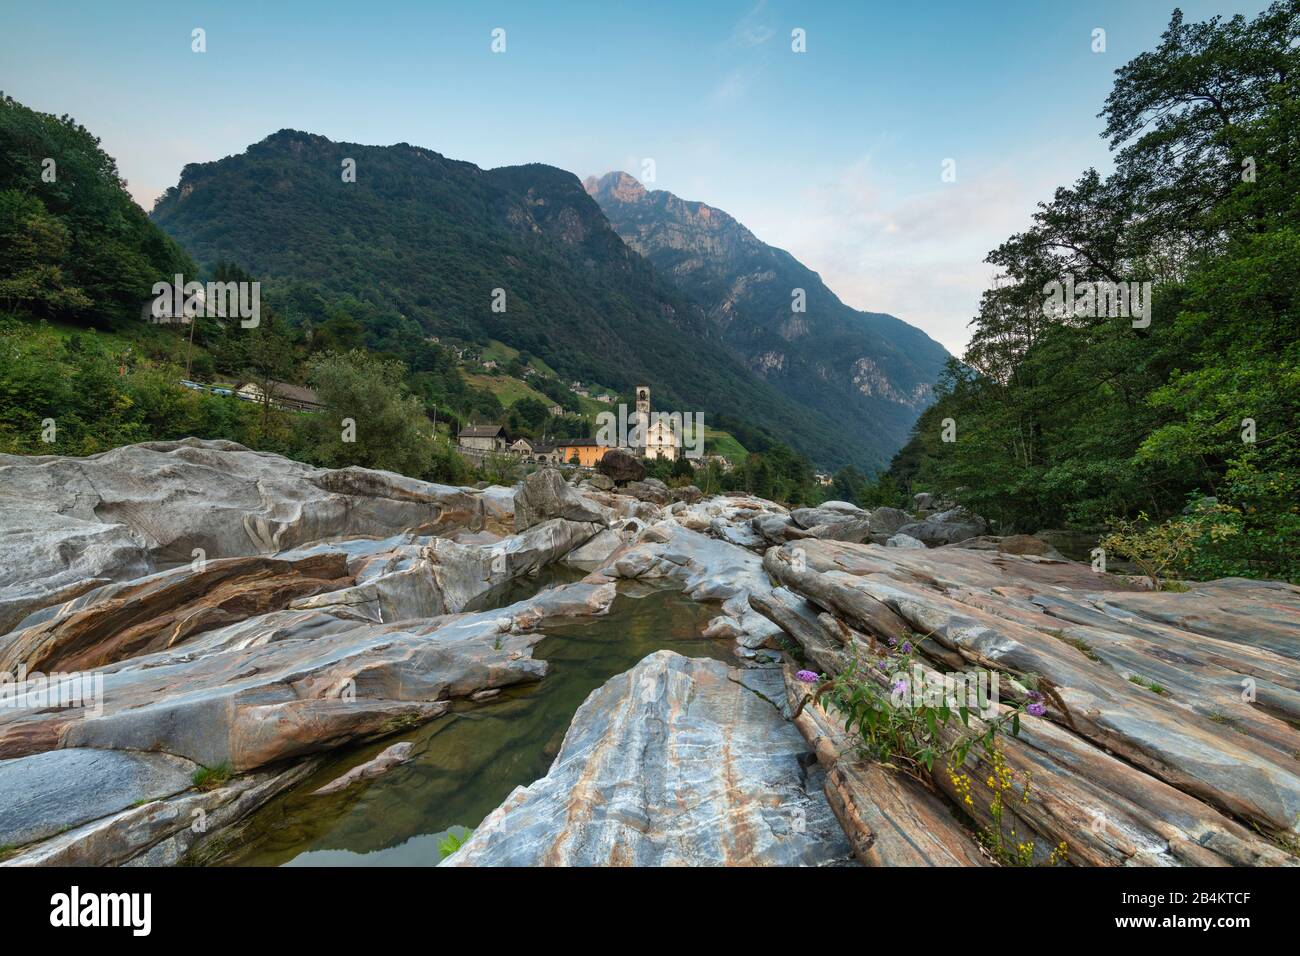 Switzerland, Ticino, place Lavertezzo with church, colorful stones in the Verzasca valley Stock Photo